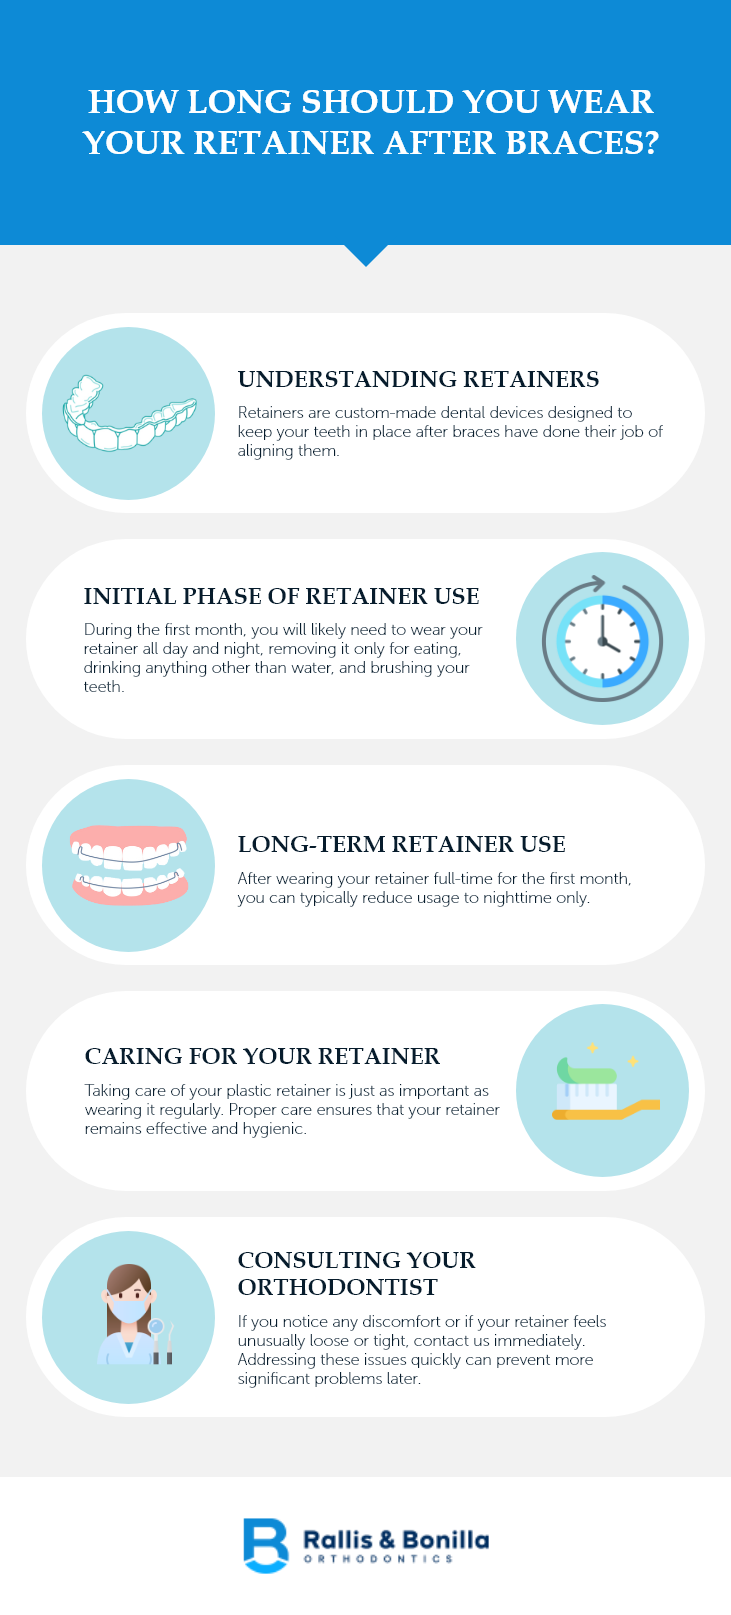 How Long Should You Wear Your Retainer After Braces?